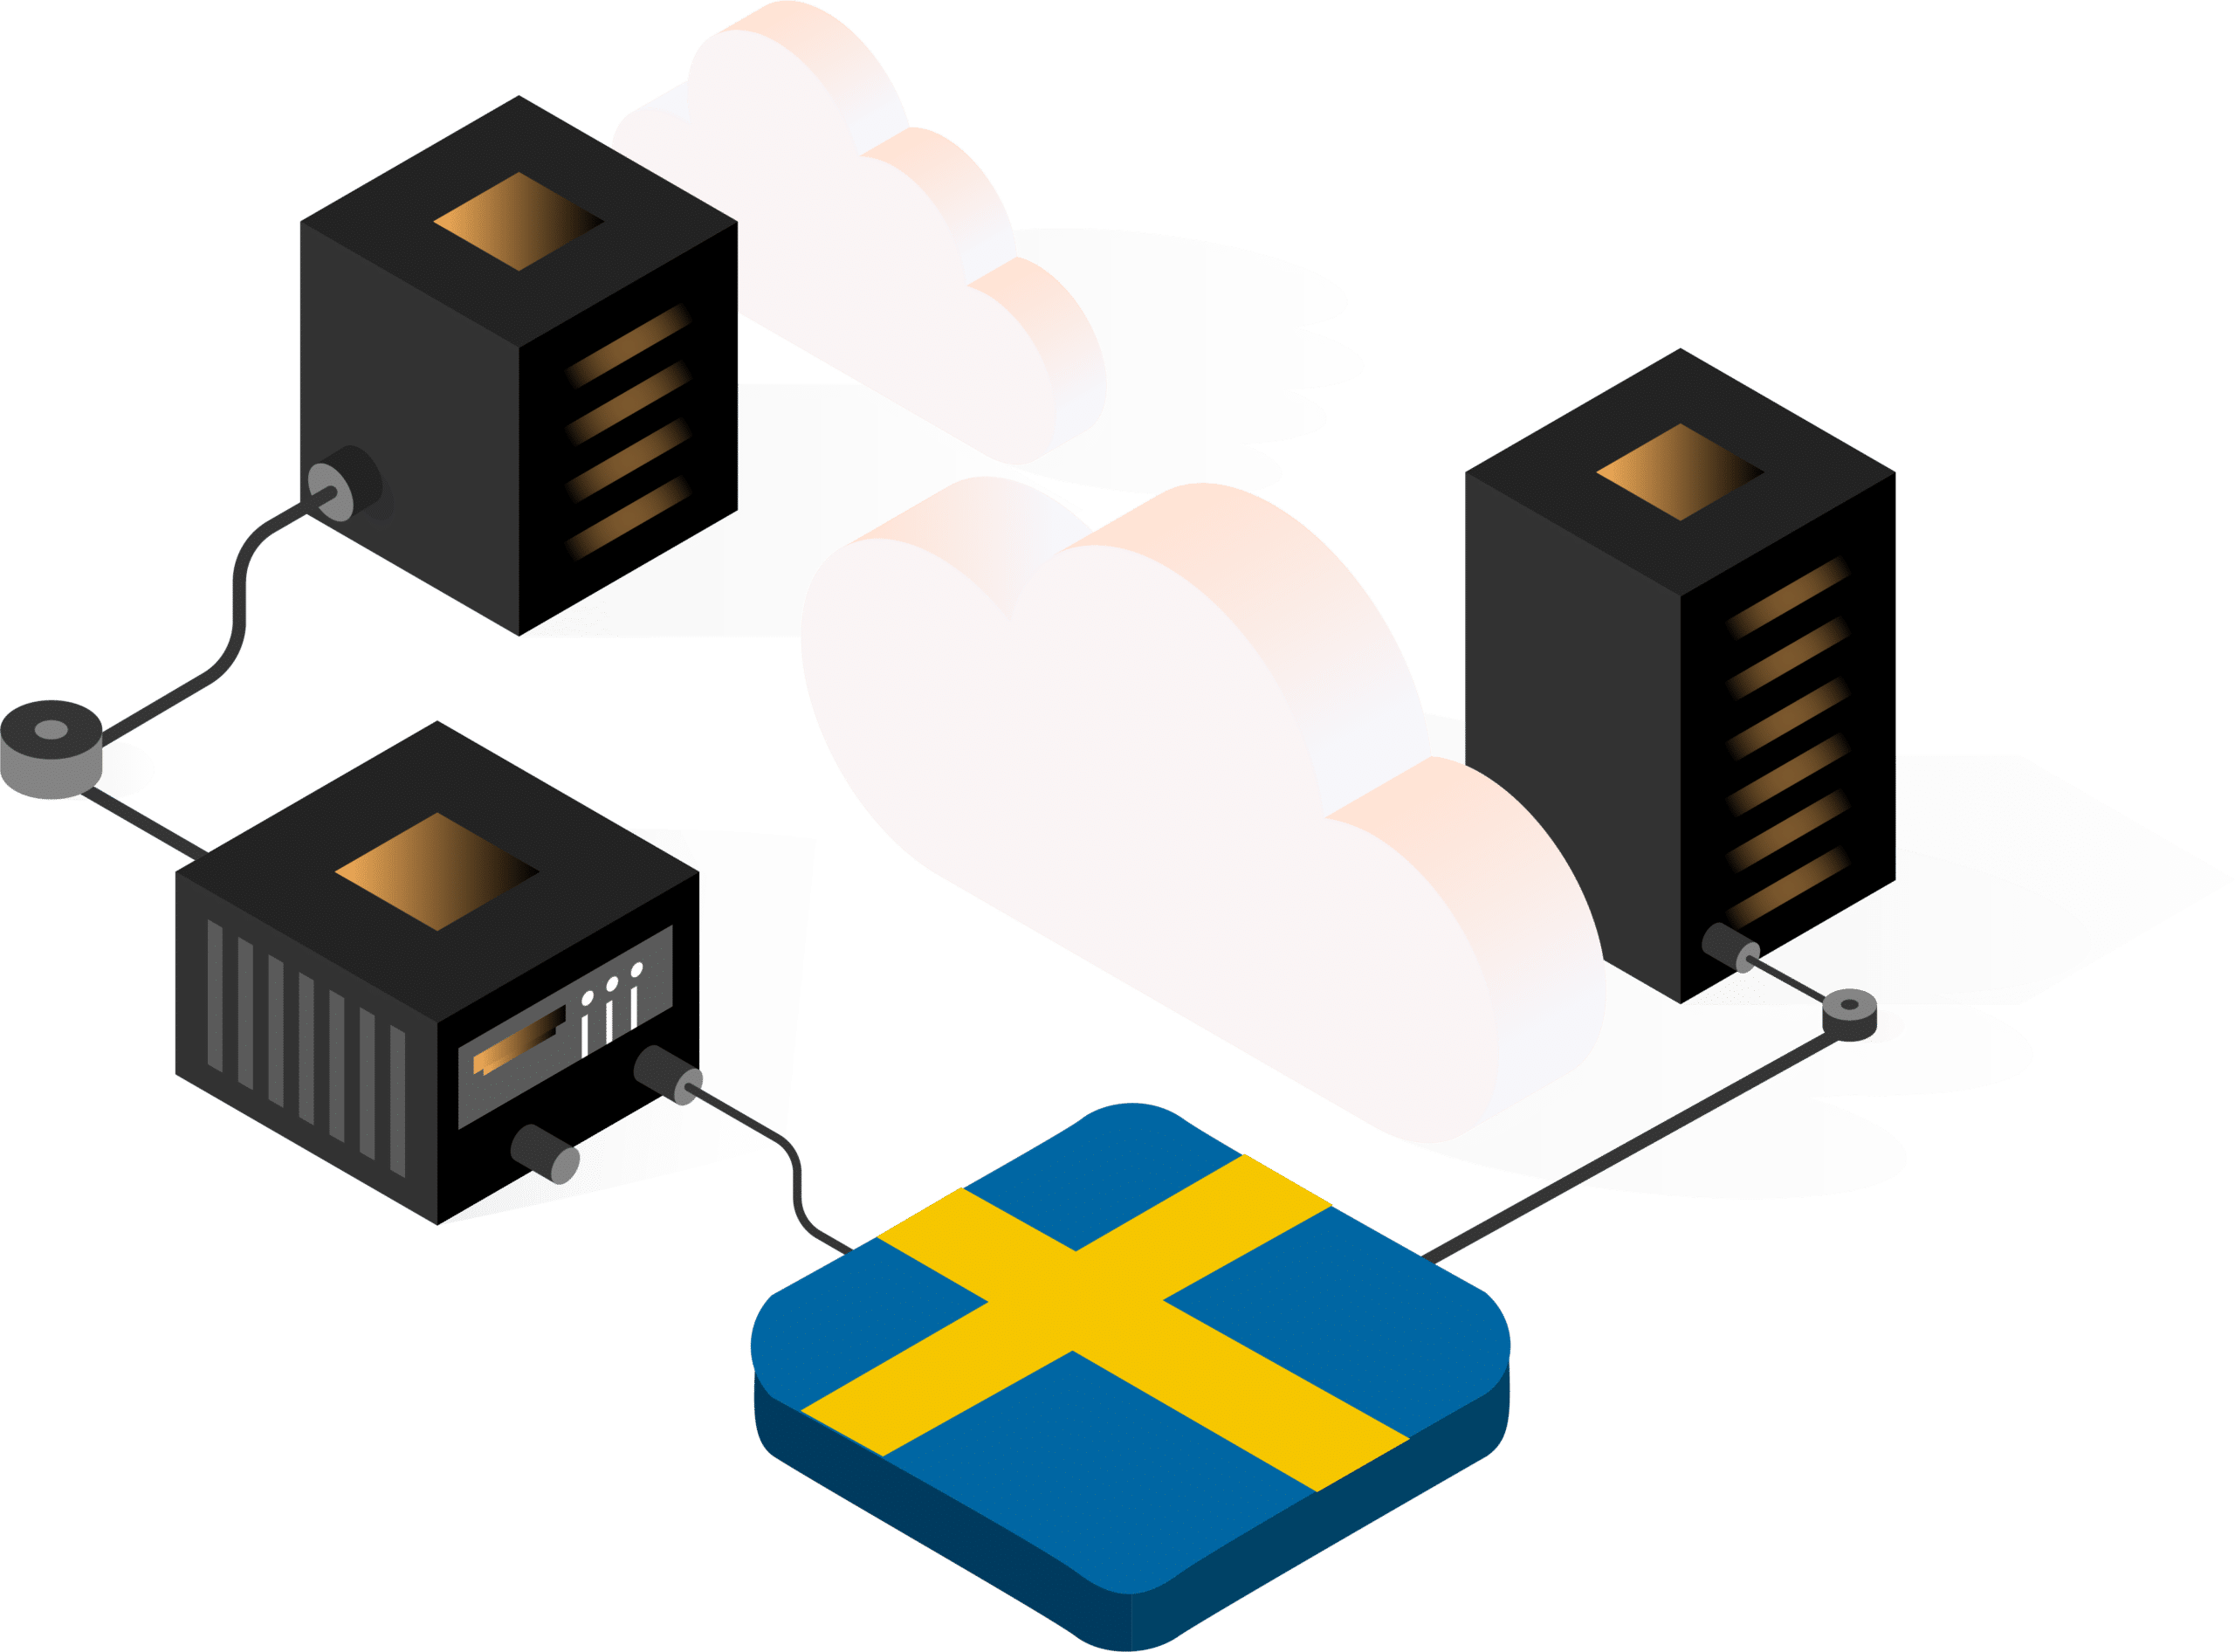 Abstract illustration showing a swedish cloud provider.